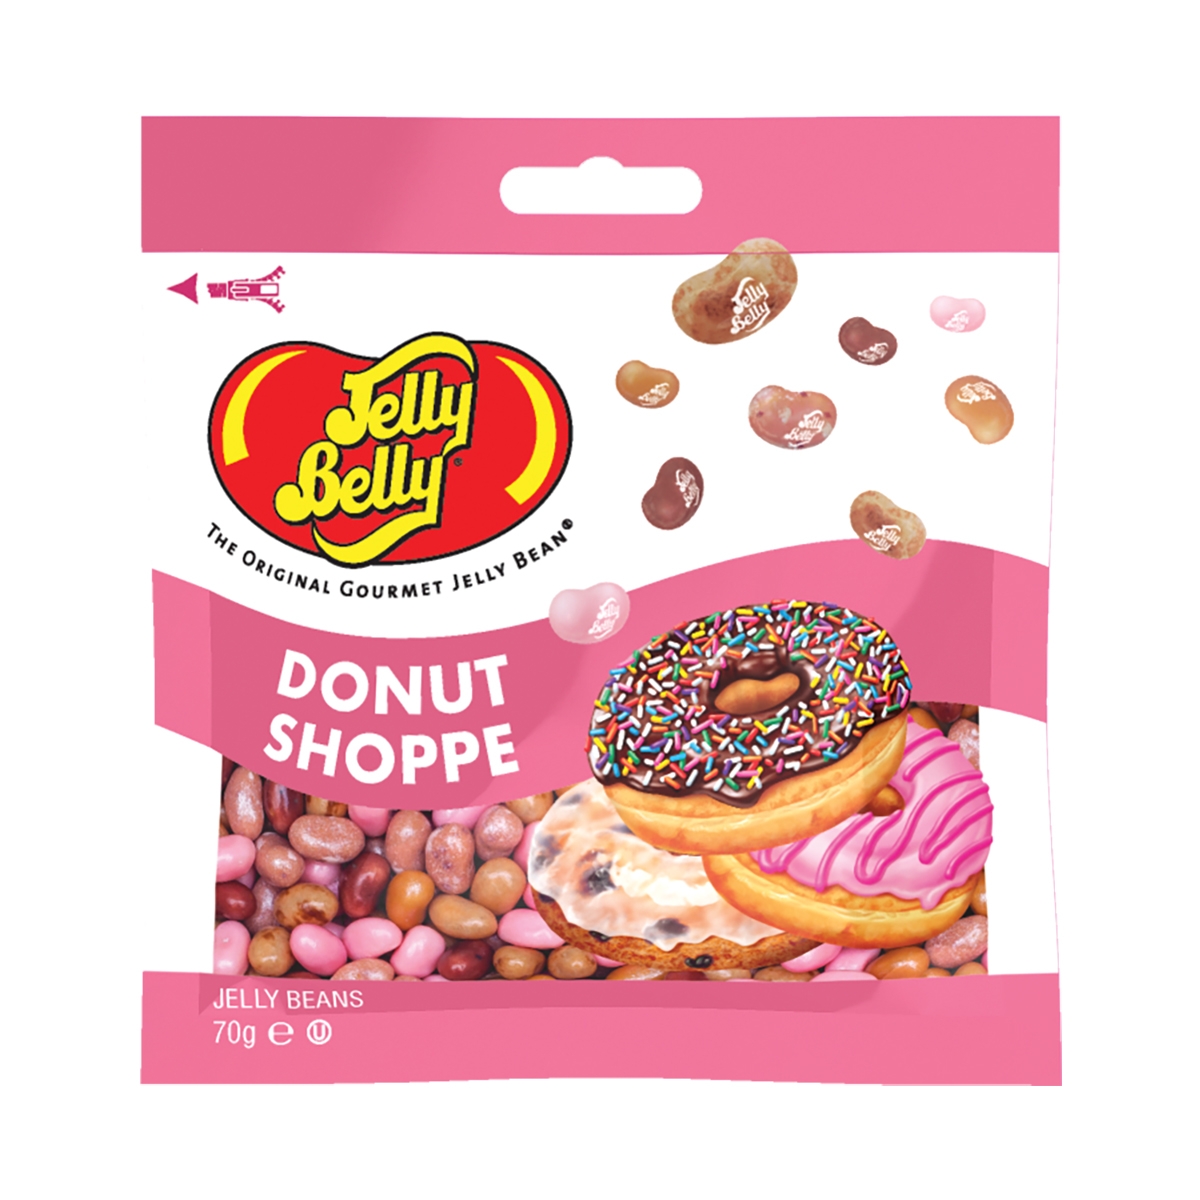 Jelly Belly 70g bags